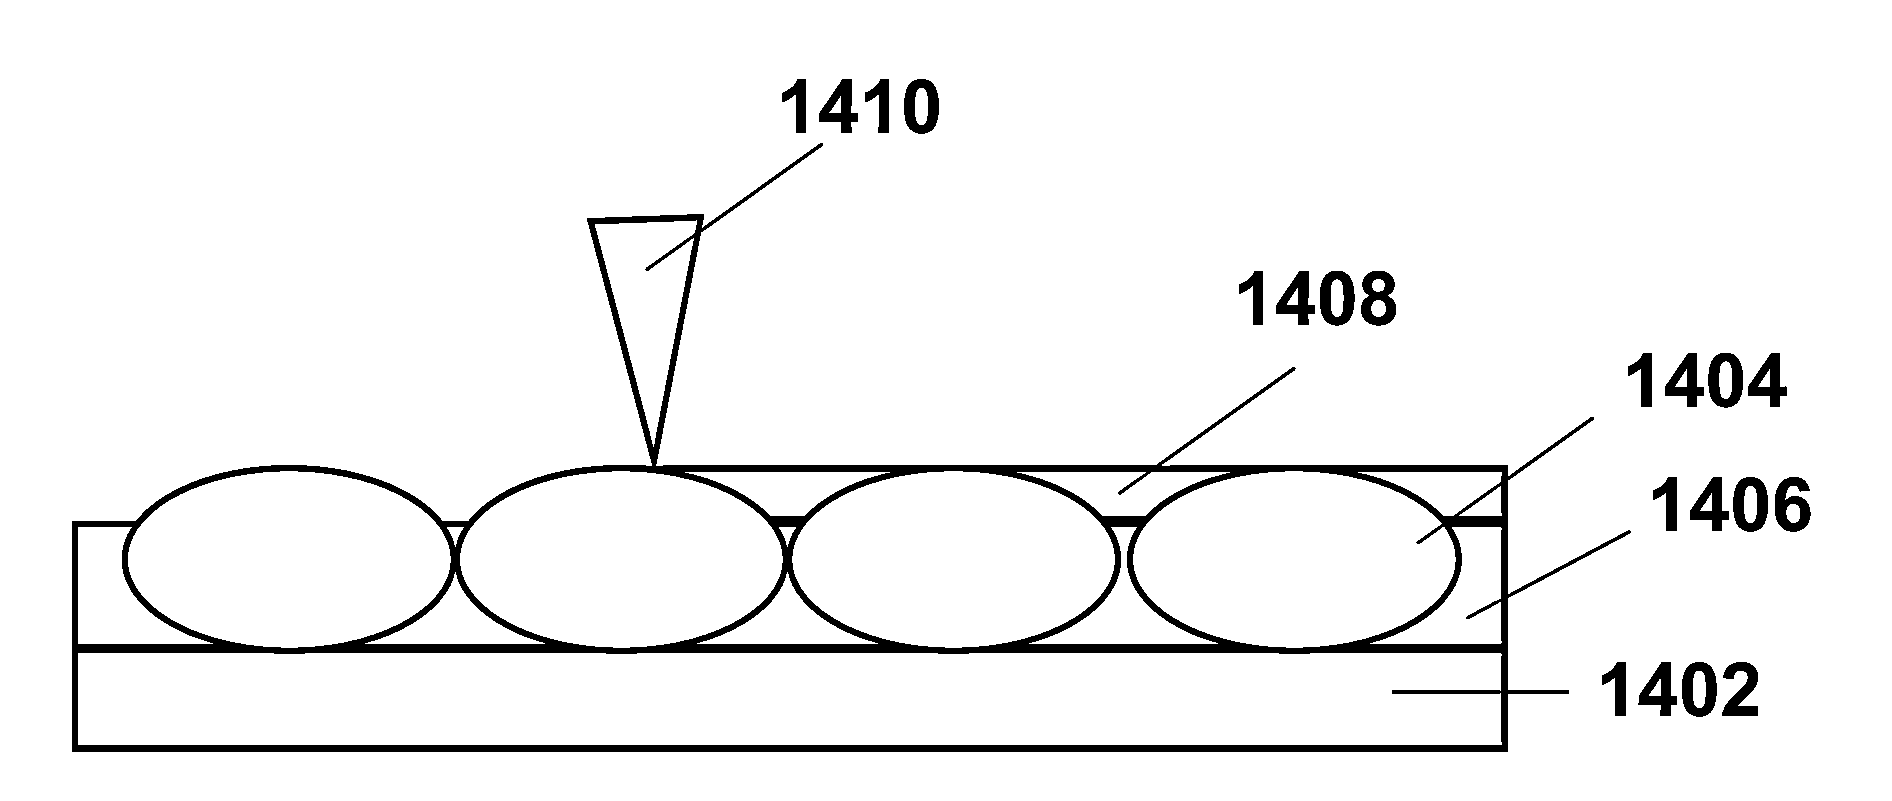 Electro-optic displays, and materials for use therein